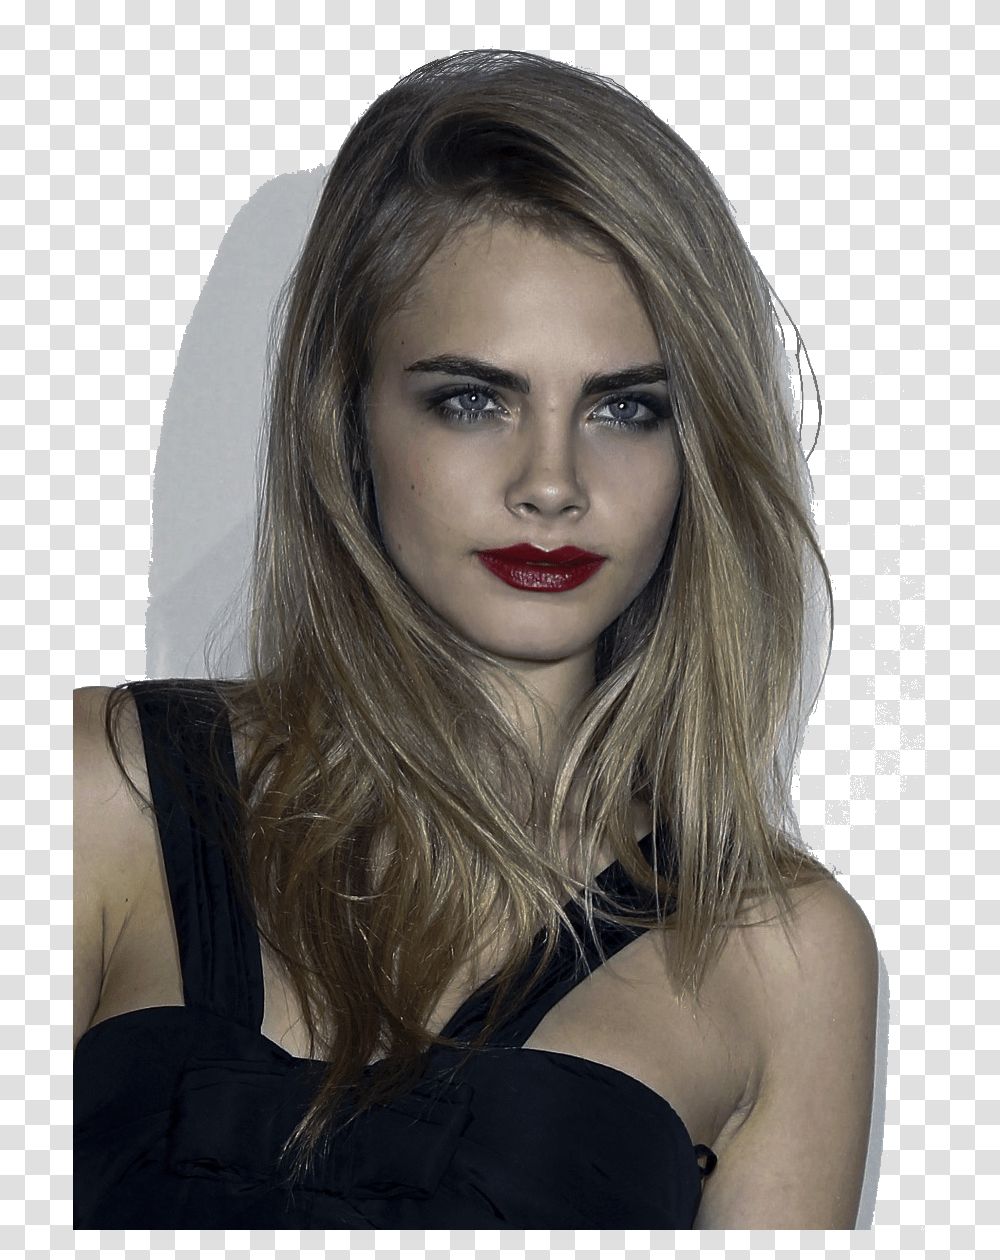 Best Photo Of Cara Delevingne, Person, Lipstick, Blonde, Woman Transparent Png